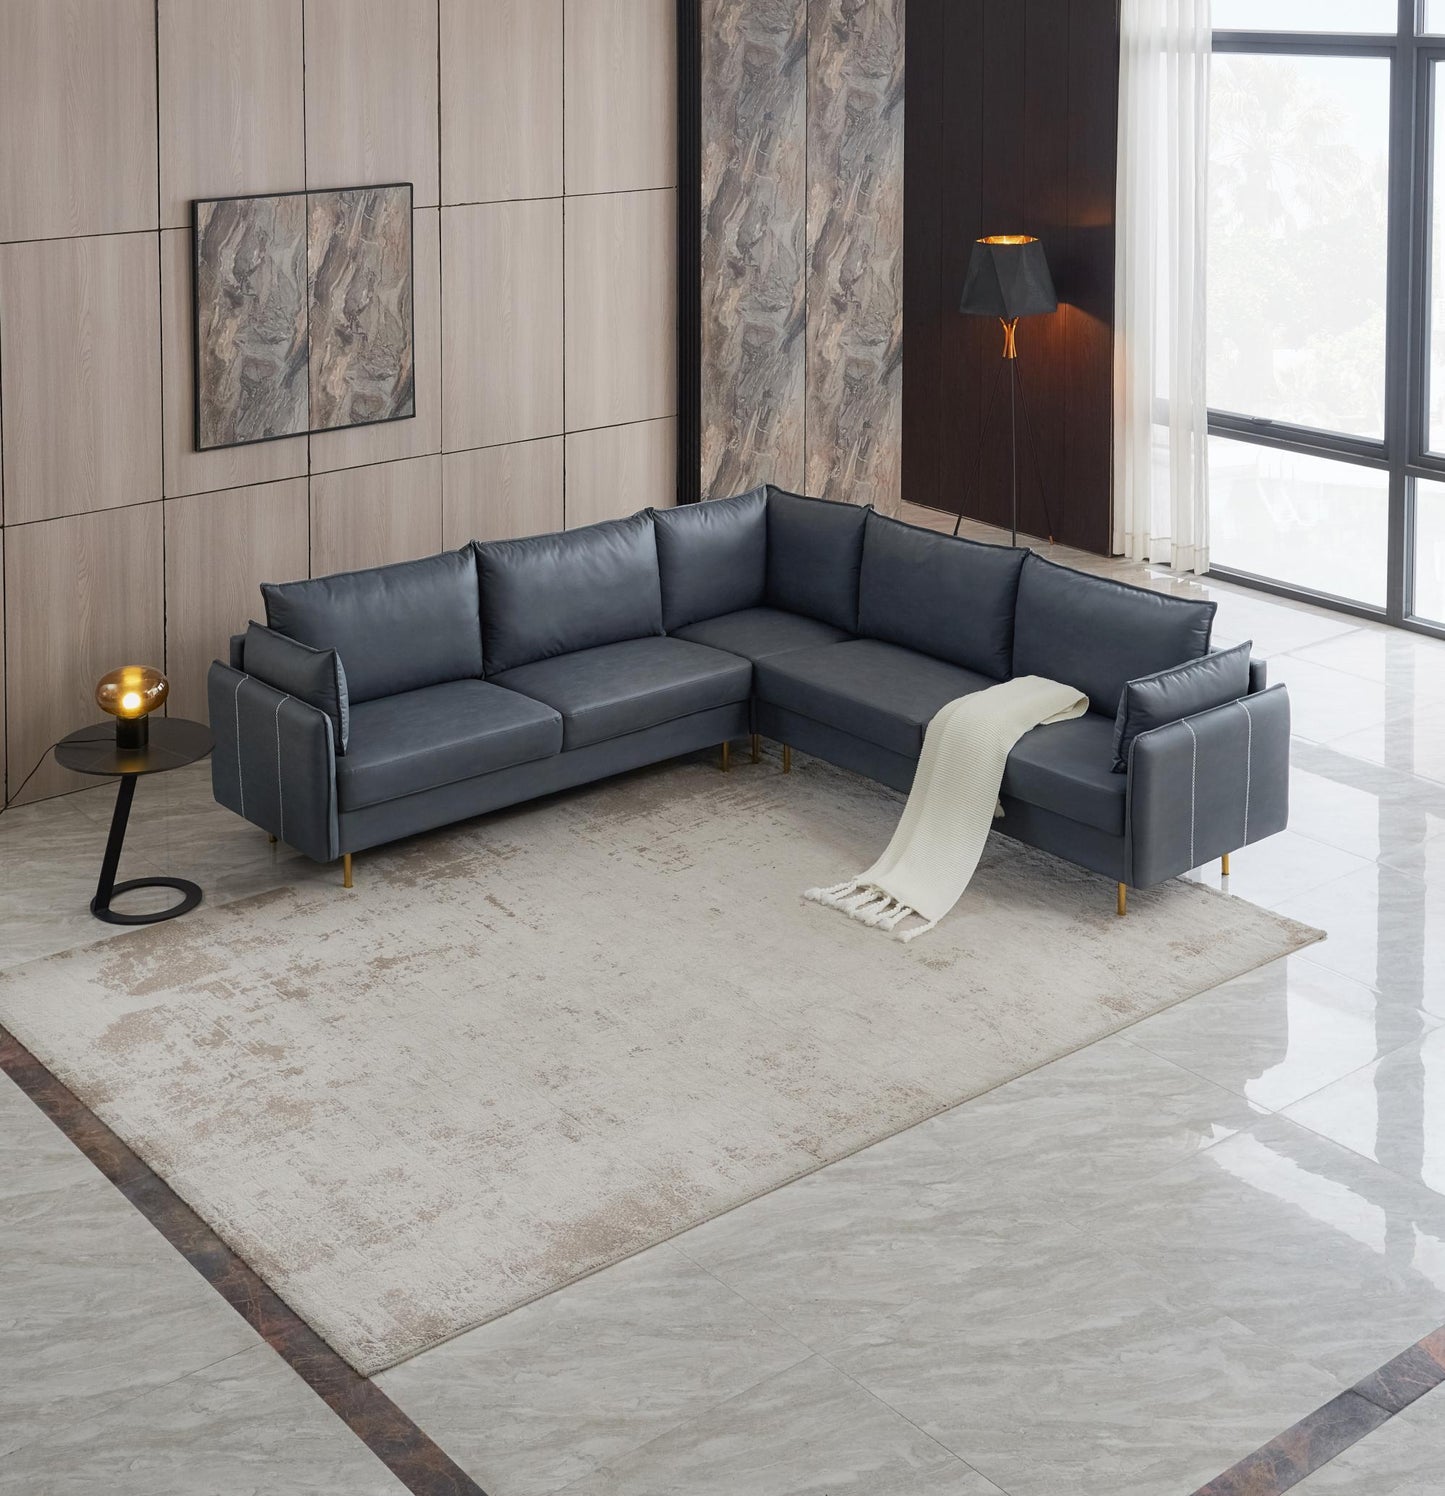 Dark Grey L-Shaped Technical Leather Sectional Sofa, 92.5x92.5"